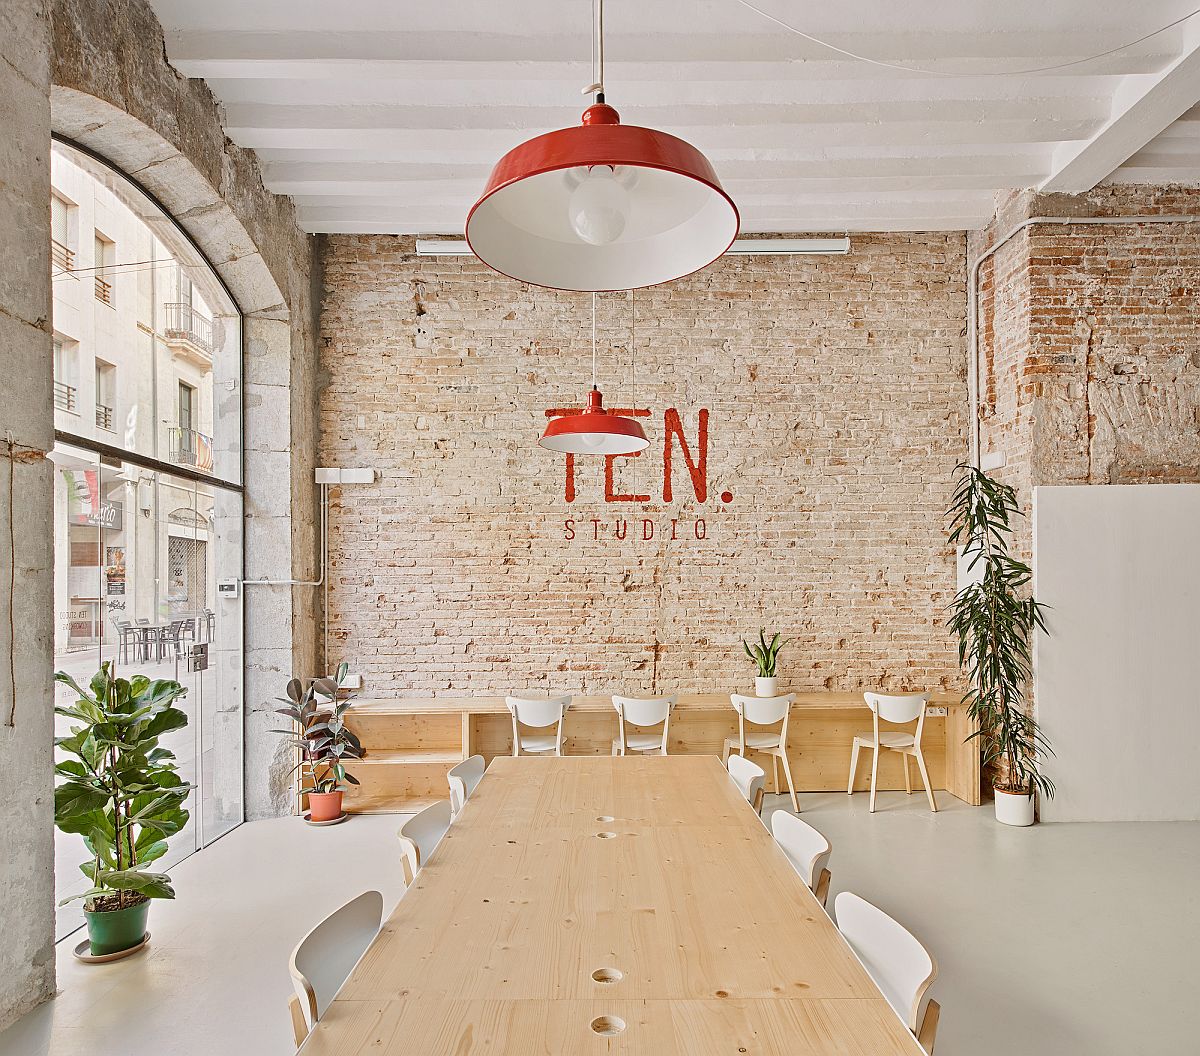 Office-of-TEN-Studio-in-Spaing-with-white-walls-ceiling-and-exposed-brick-sections-80461